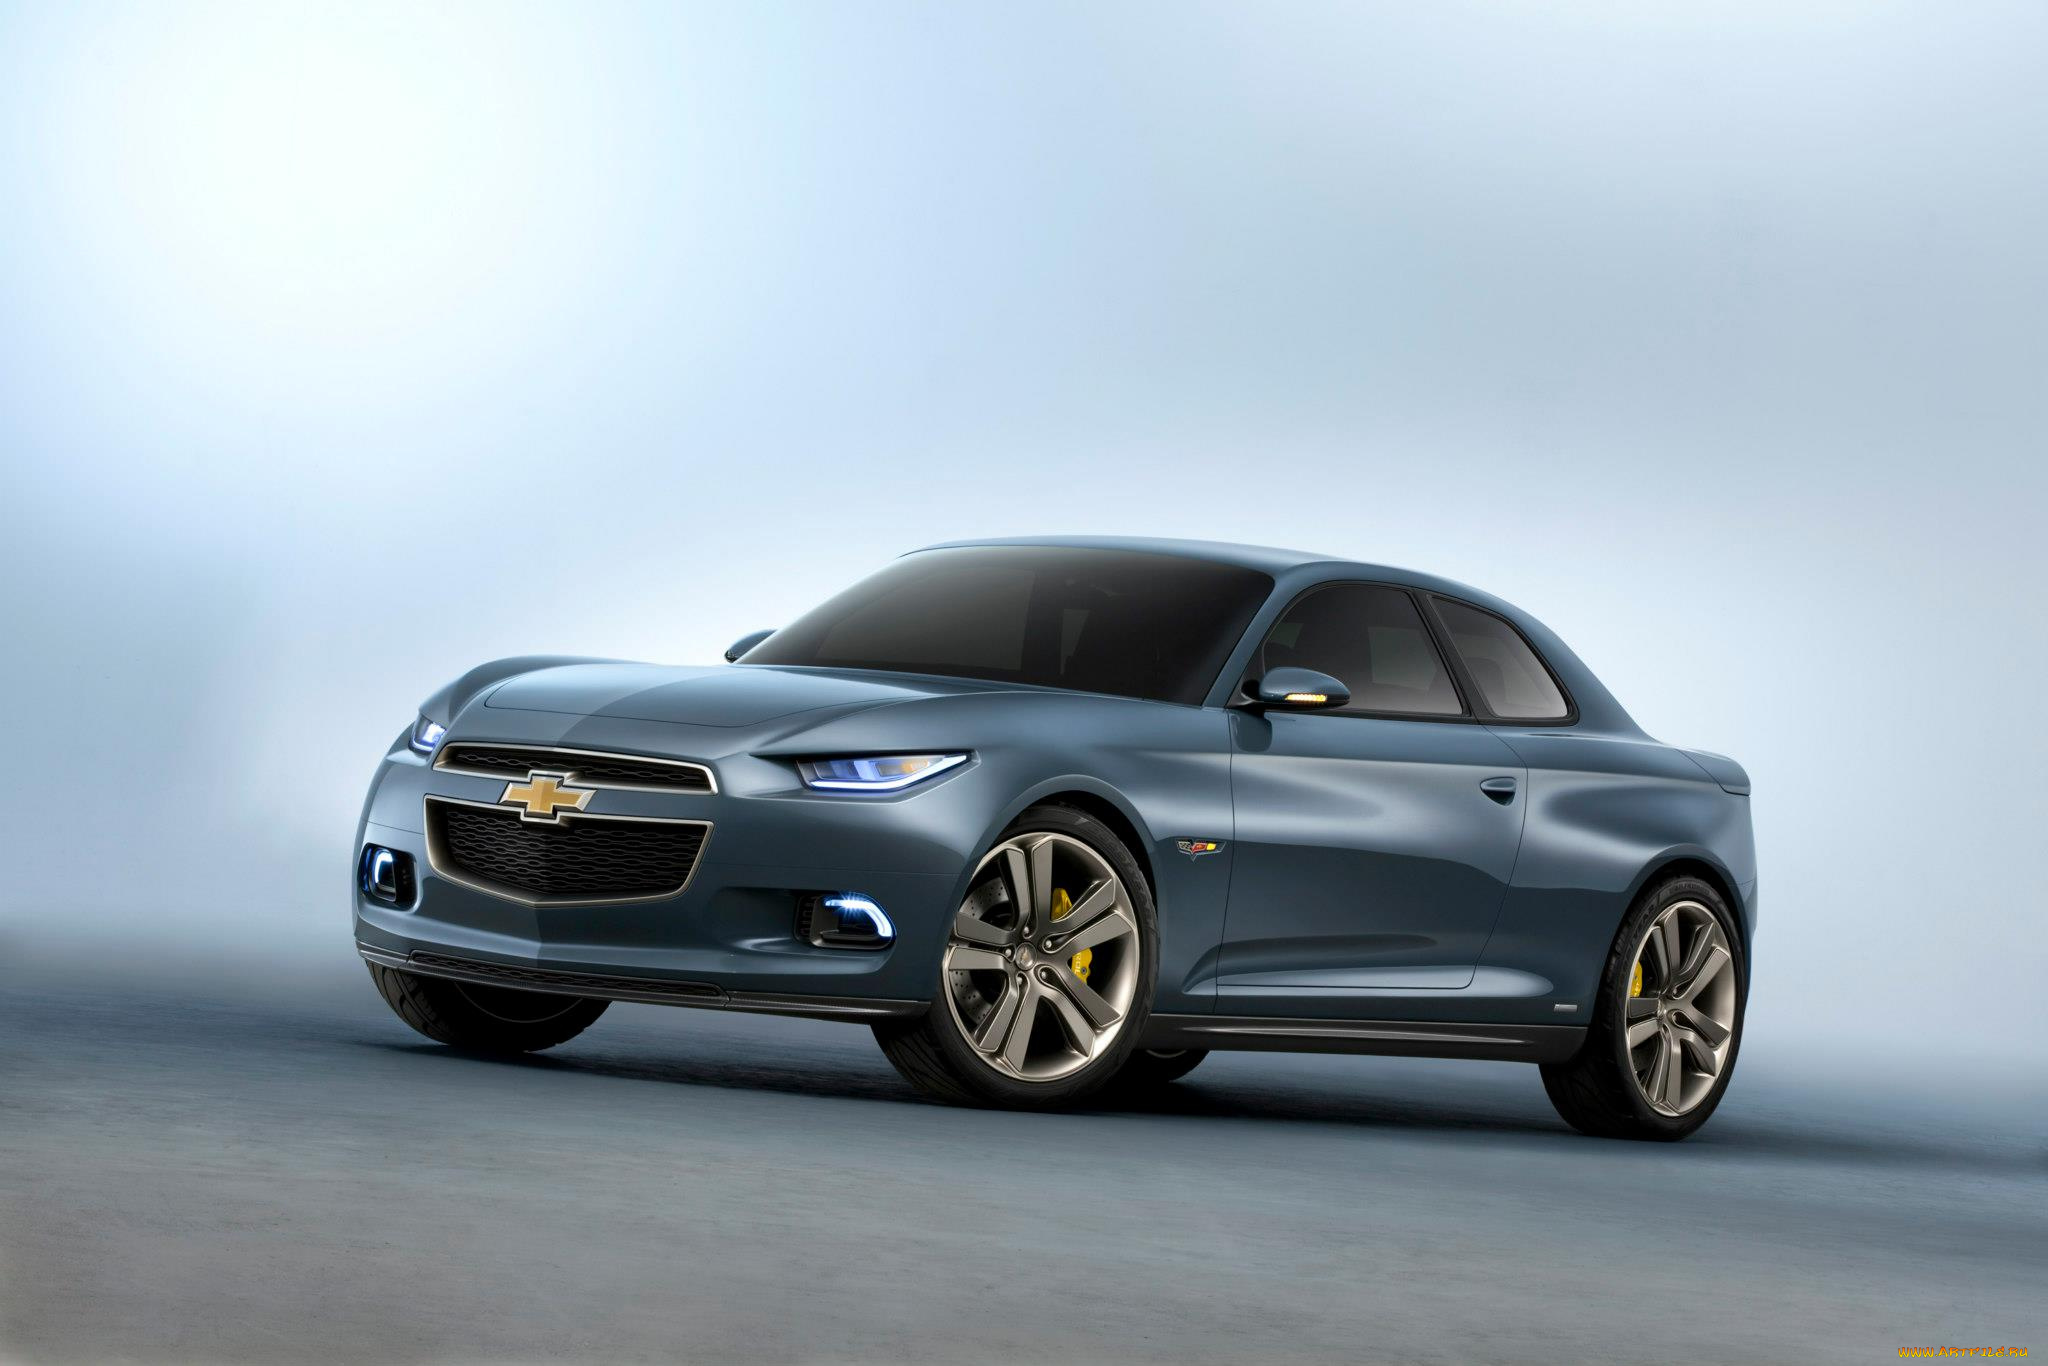 chevrolet, code, 130, rs, concept, 2012, автомобили, chevrolet, 130, code, 2012, rs, concept